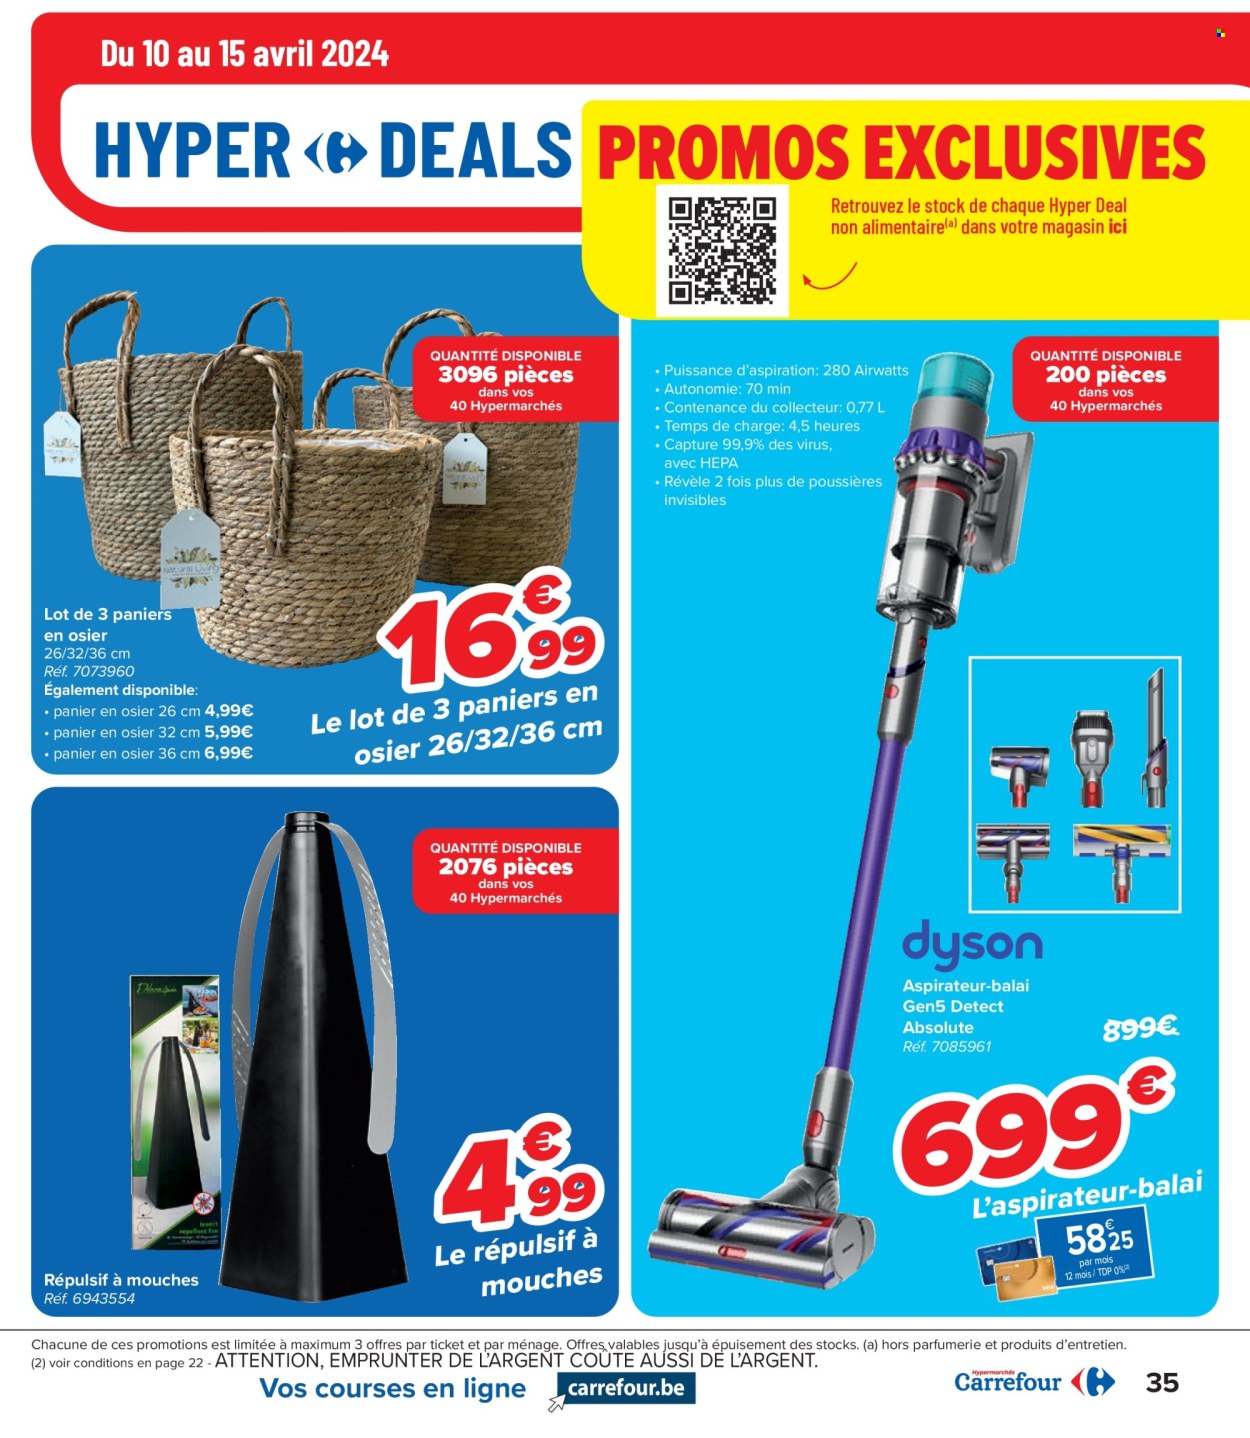 Catalogue Carrefour hypermarkt - 10.4.2024 - 22.4.2024. Page 35.